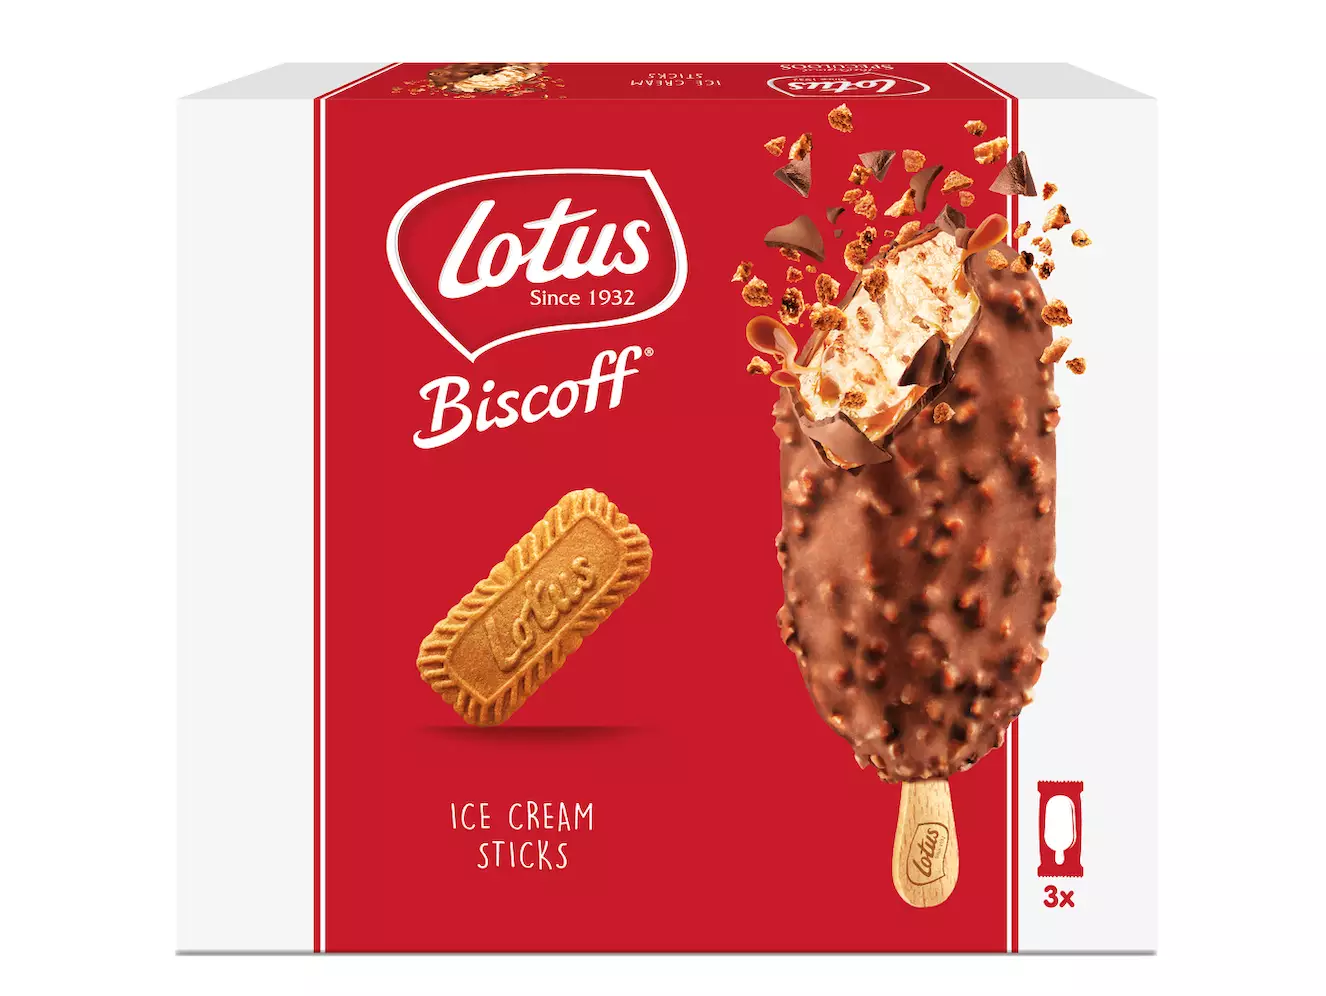 Biscoff ice cream is available now (